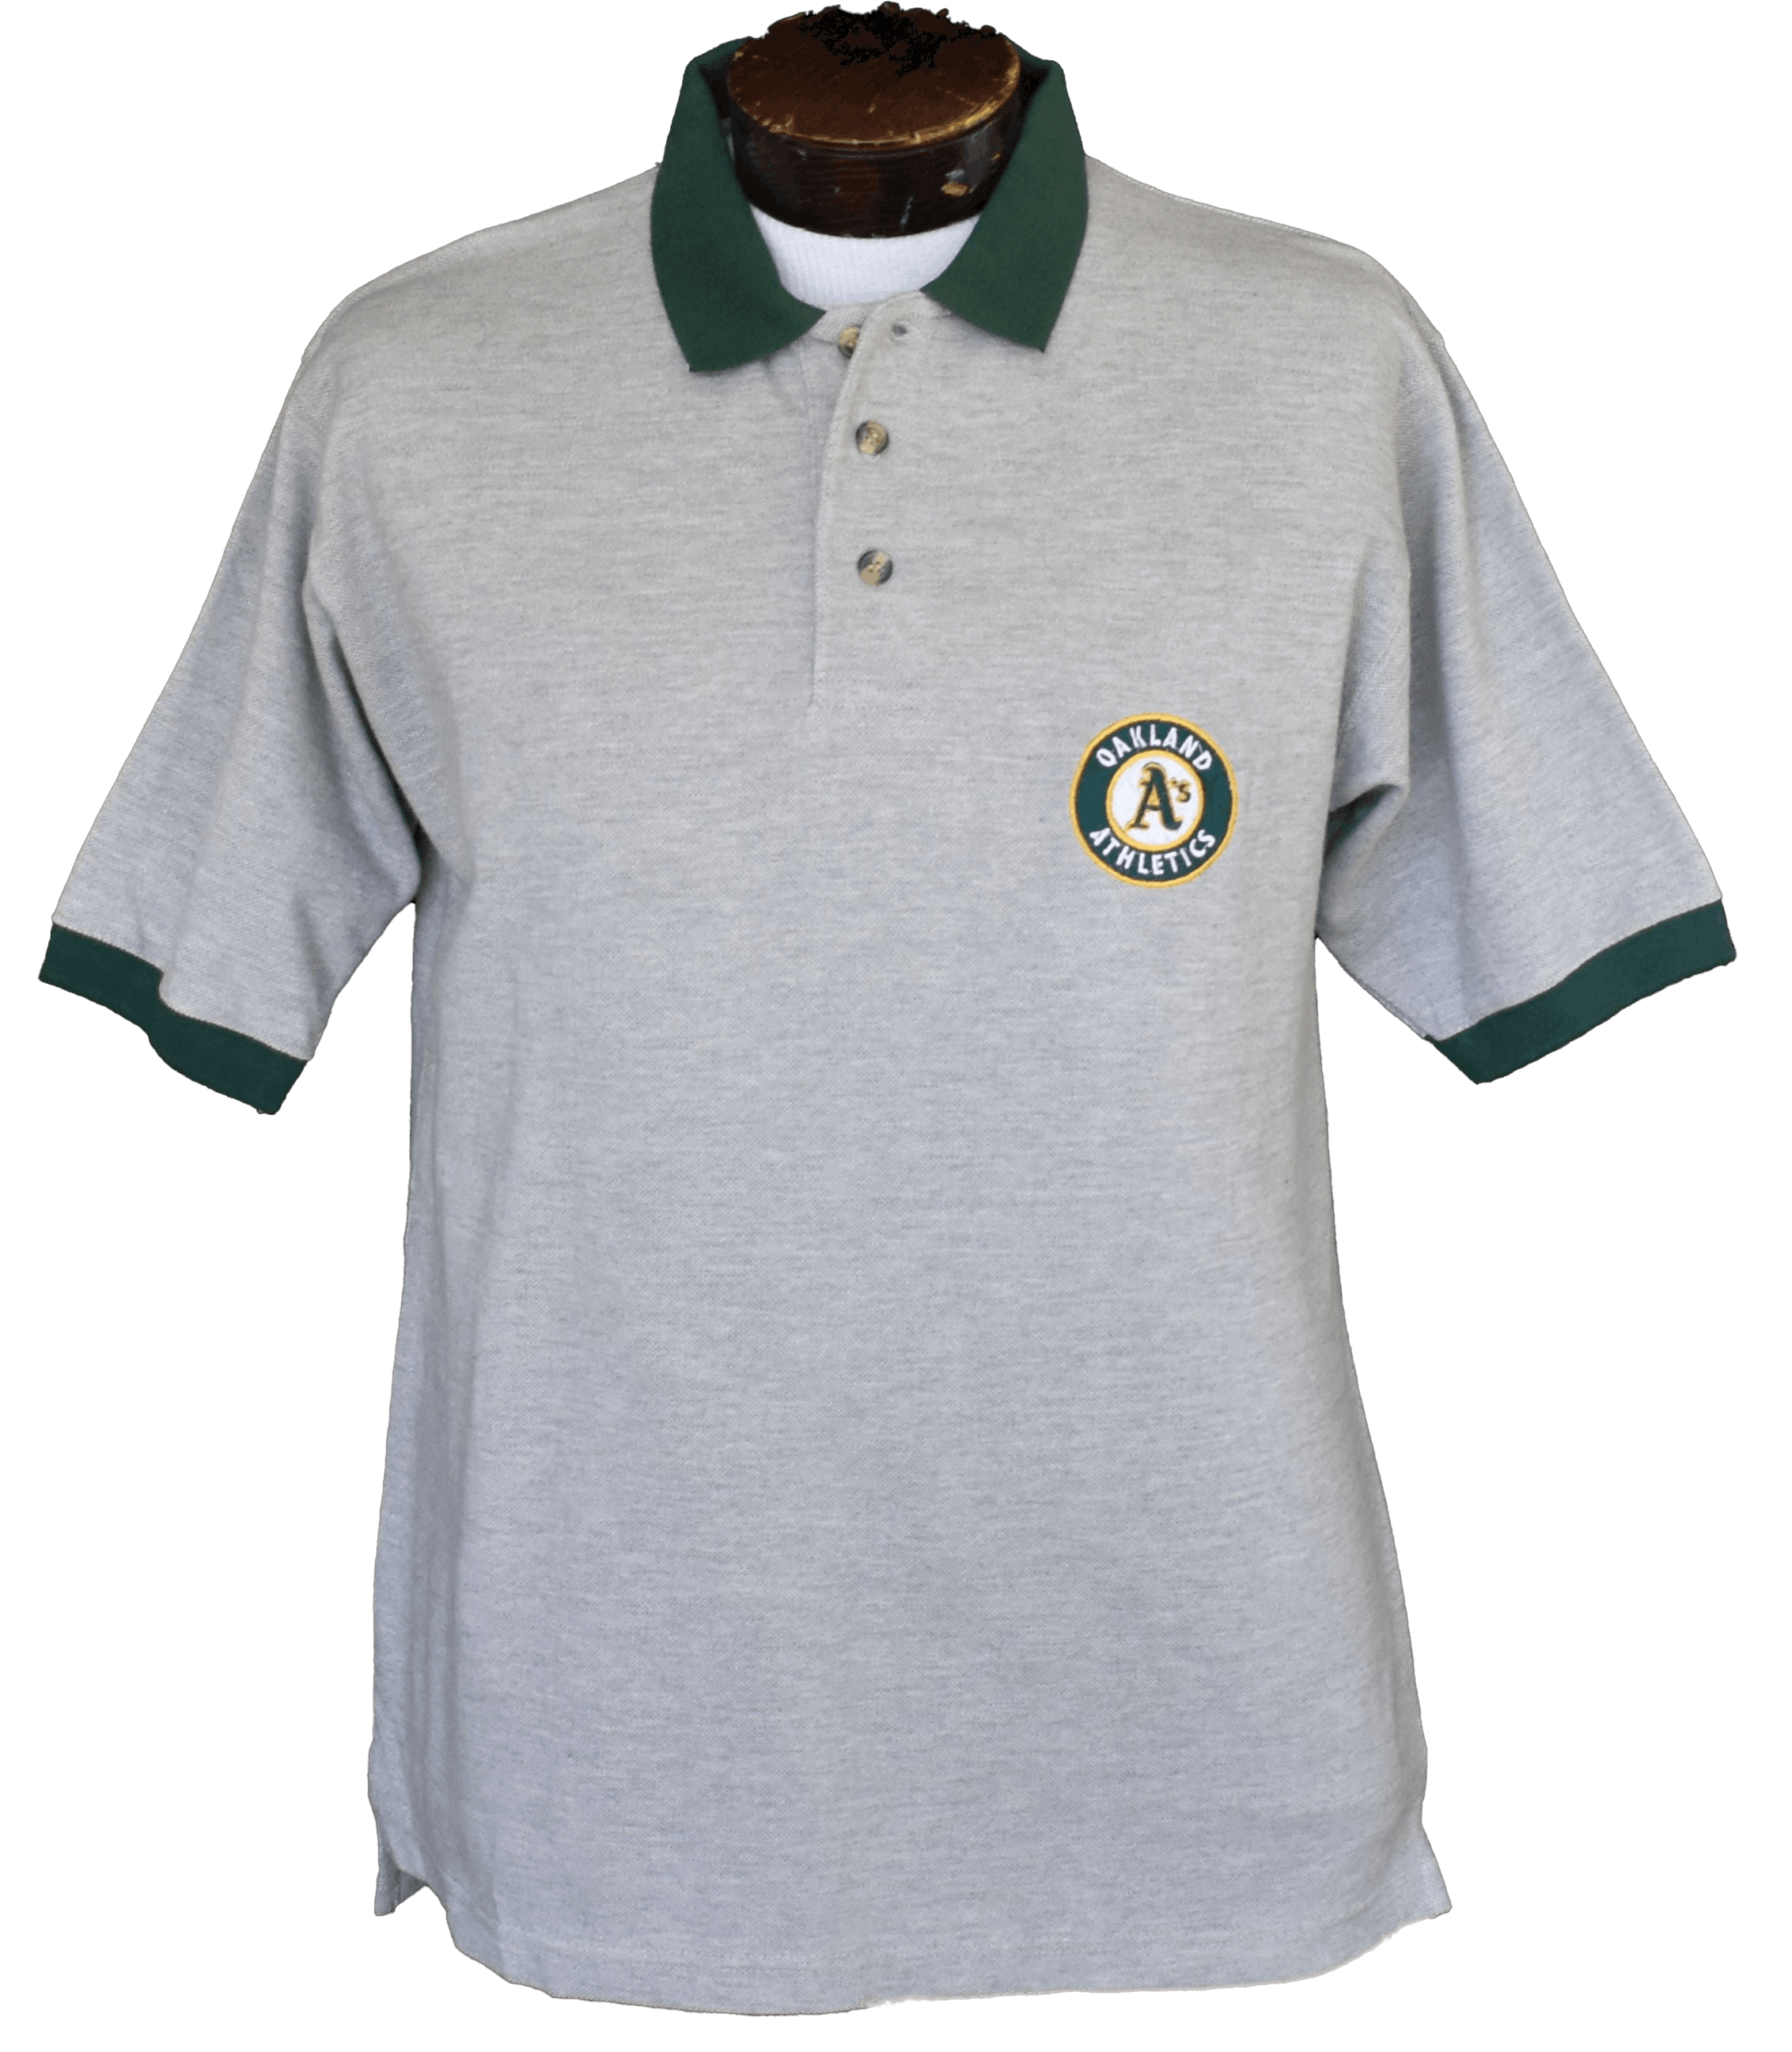 Vintage 90s Oakland A's Polo Shirt By Knights Athletic